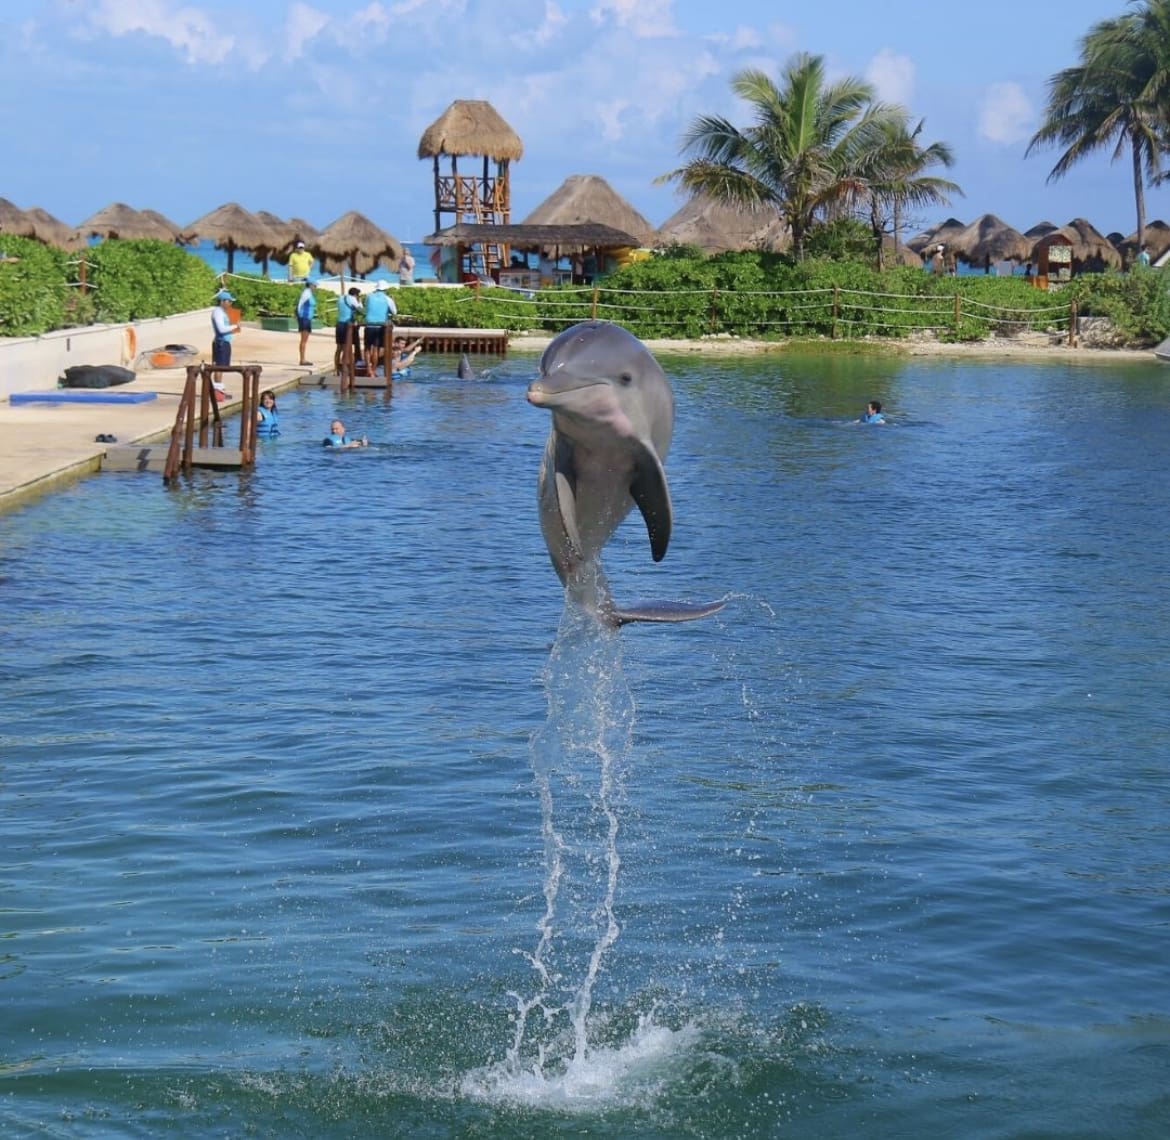 Dolphin jumping out the water at Delphinus World